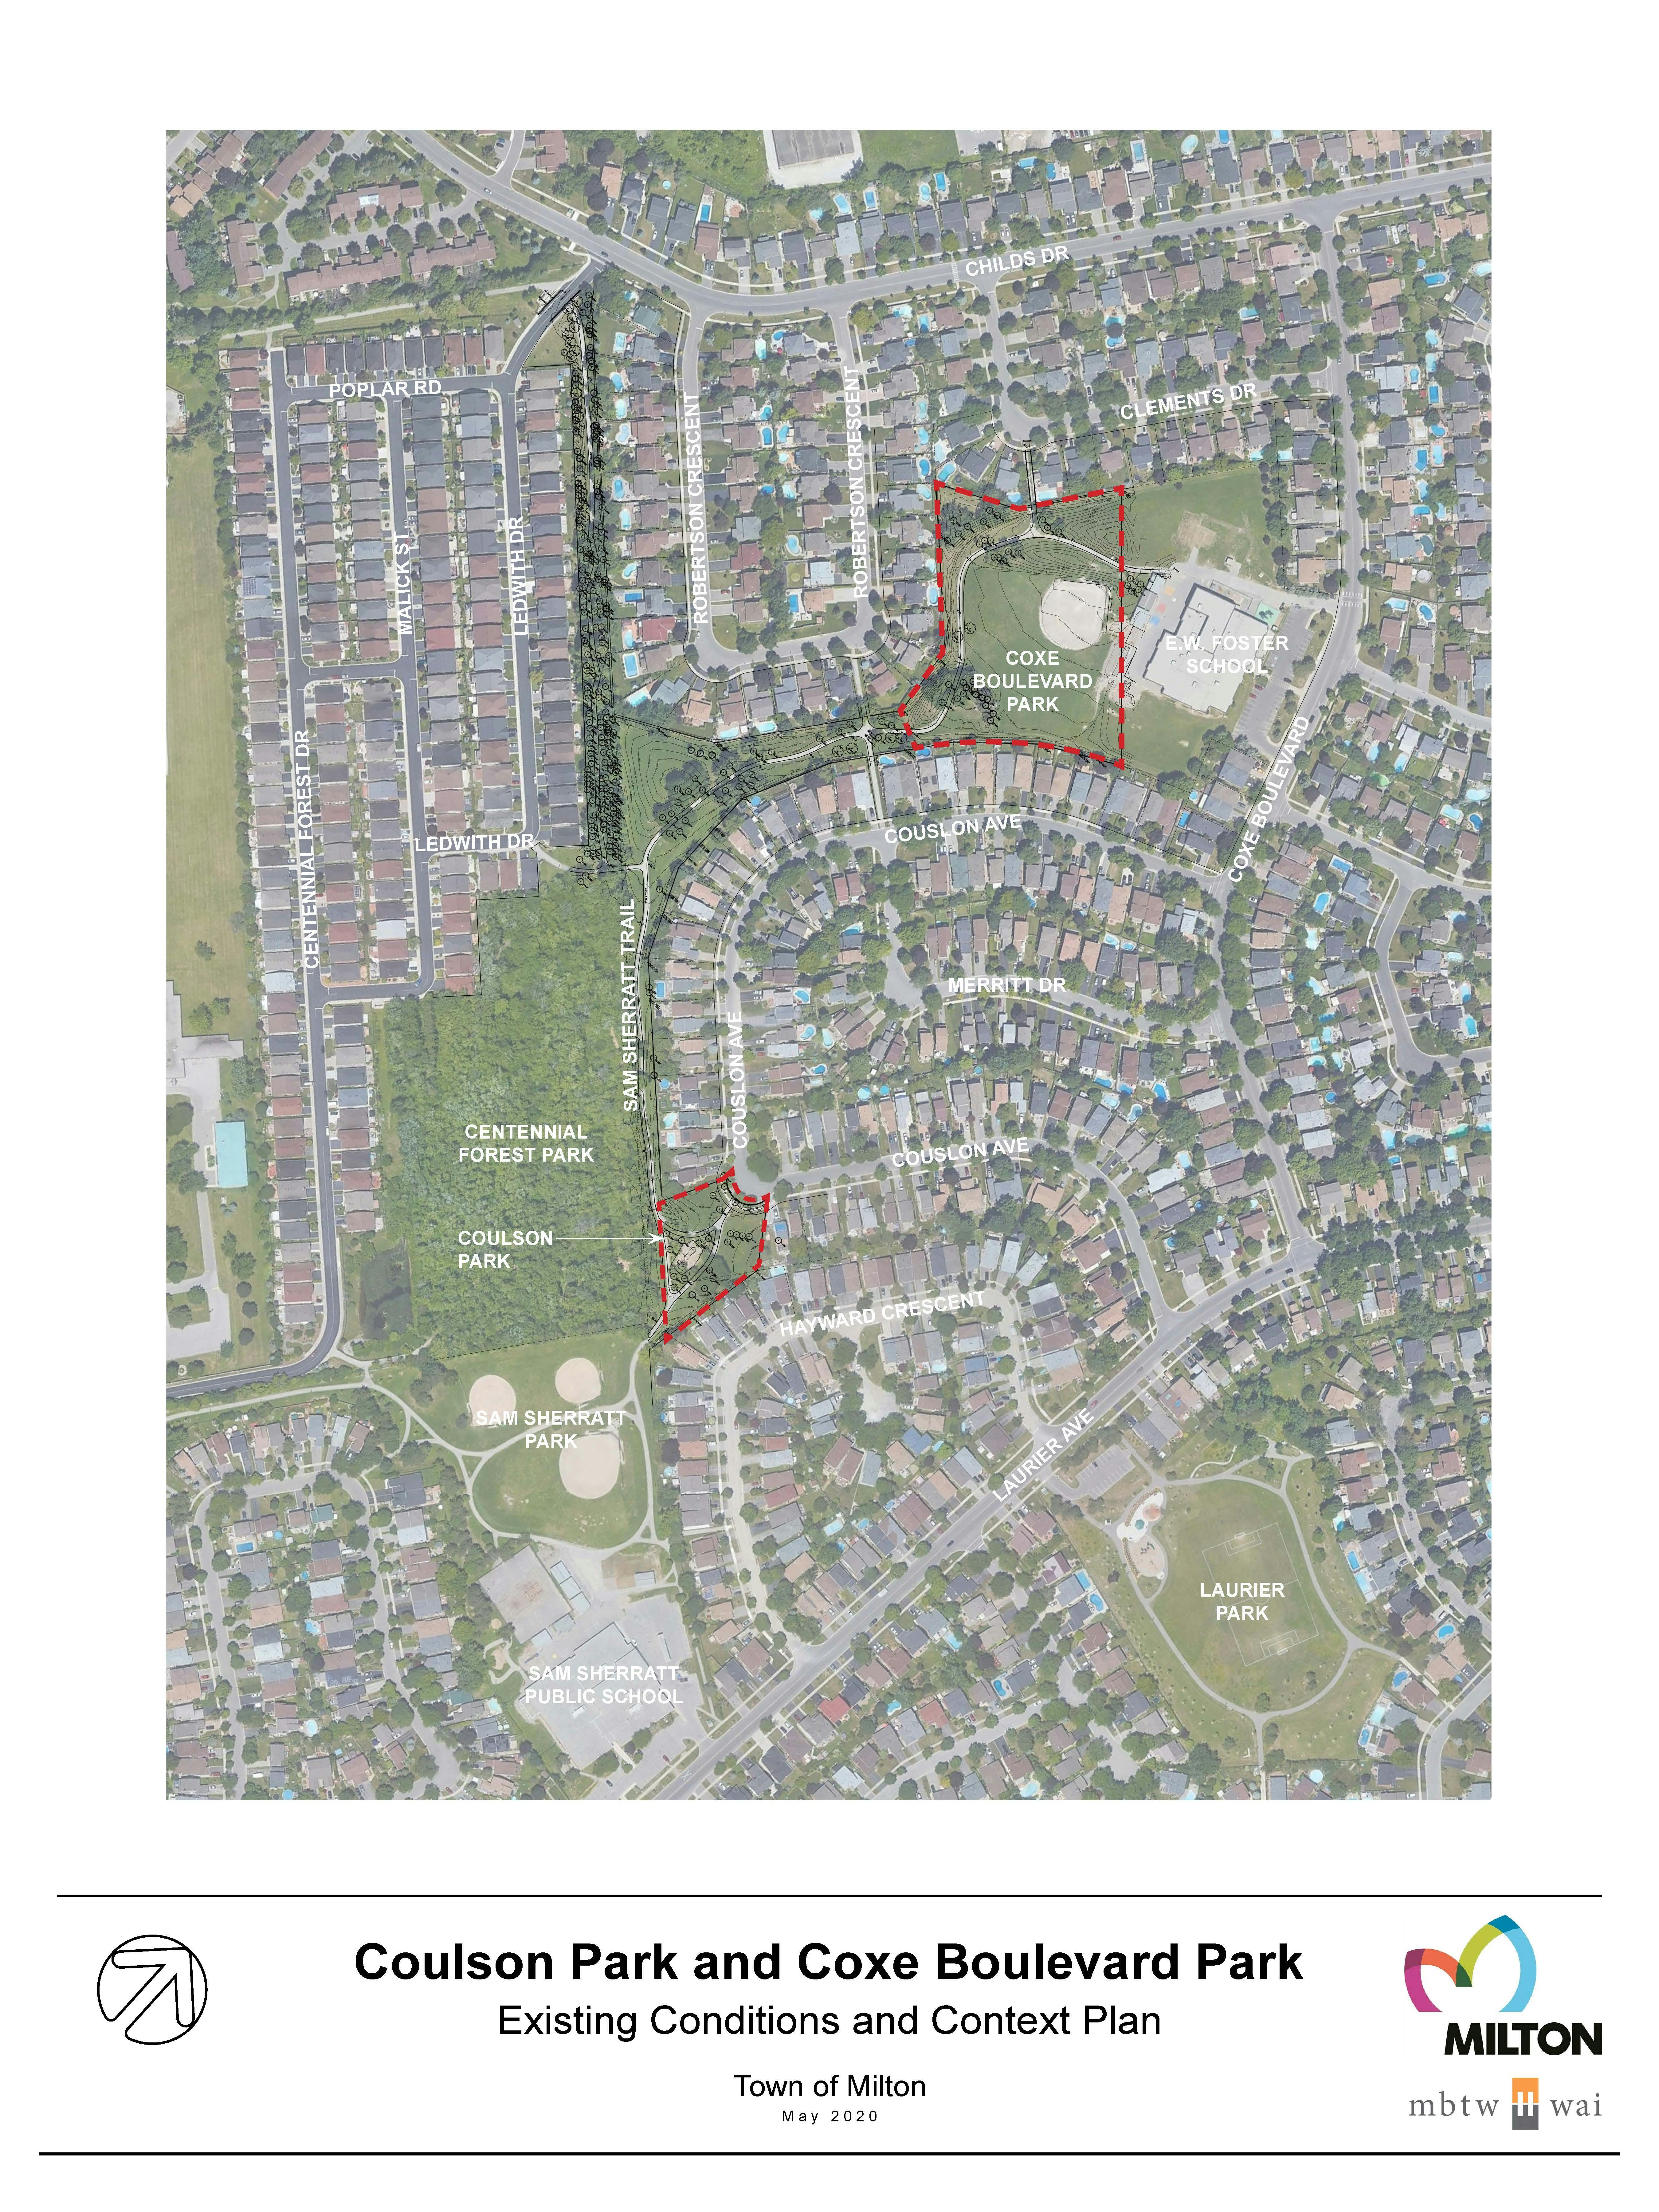 Coulson Park and Coxe Blvd Park_Existing Conditions and Context Plan.jpg